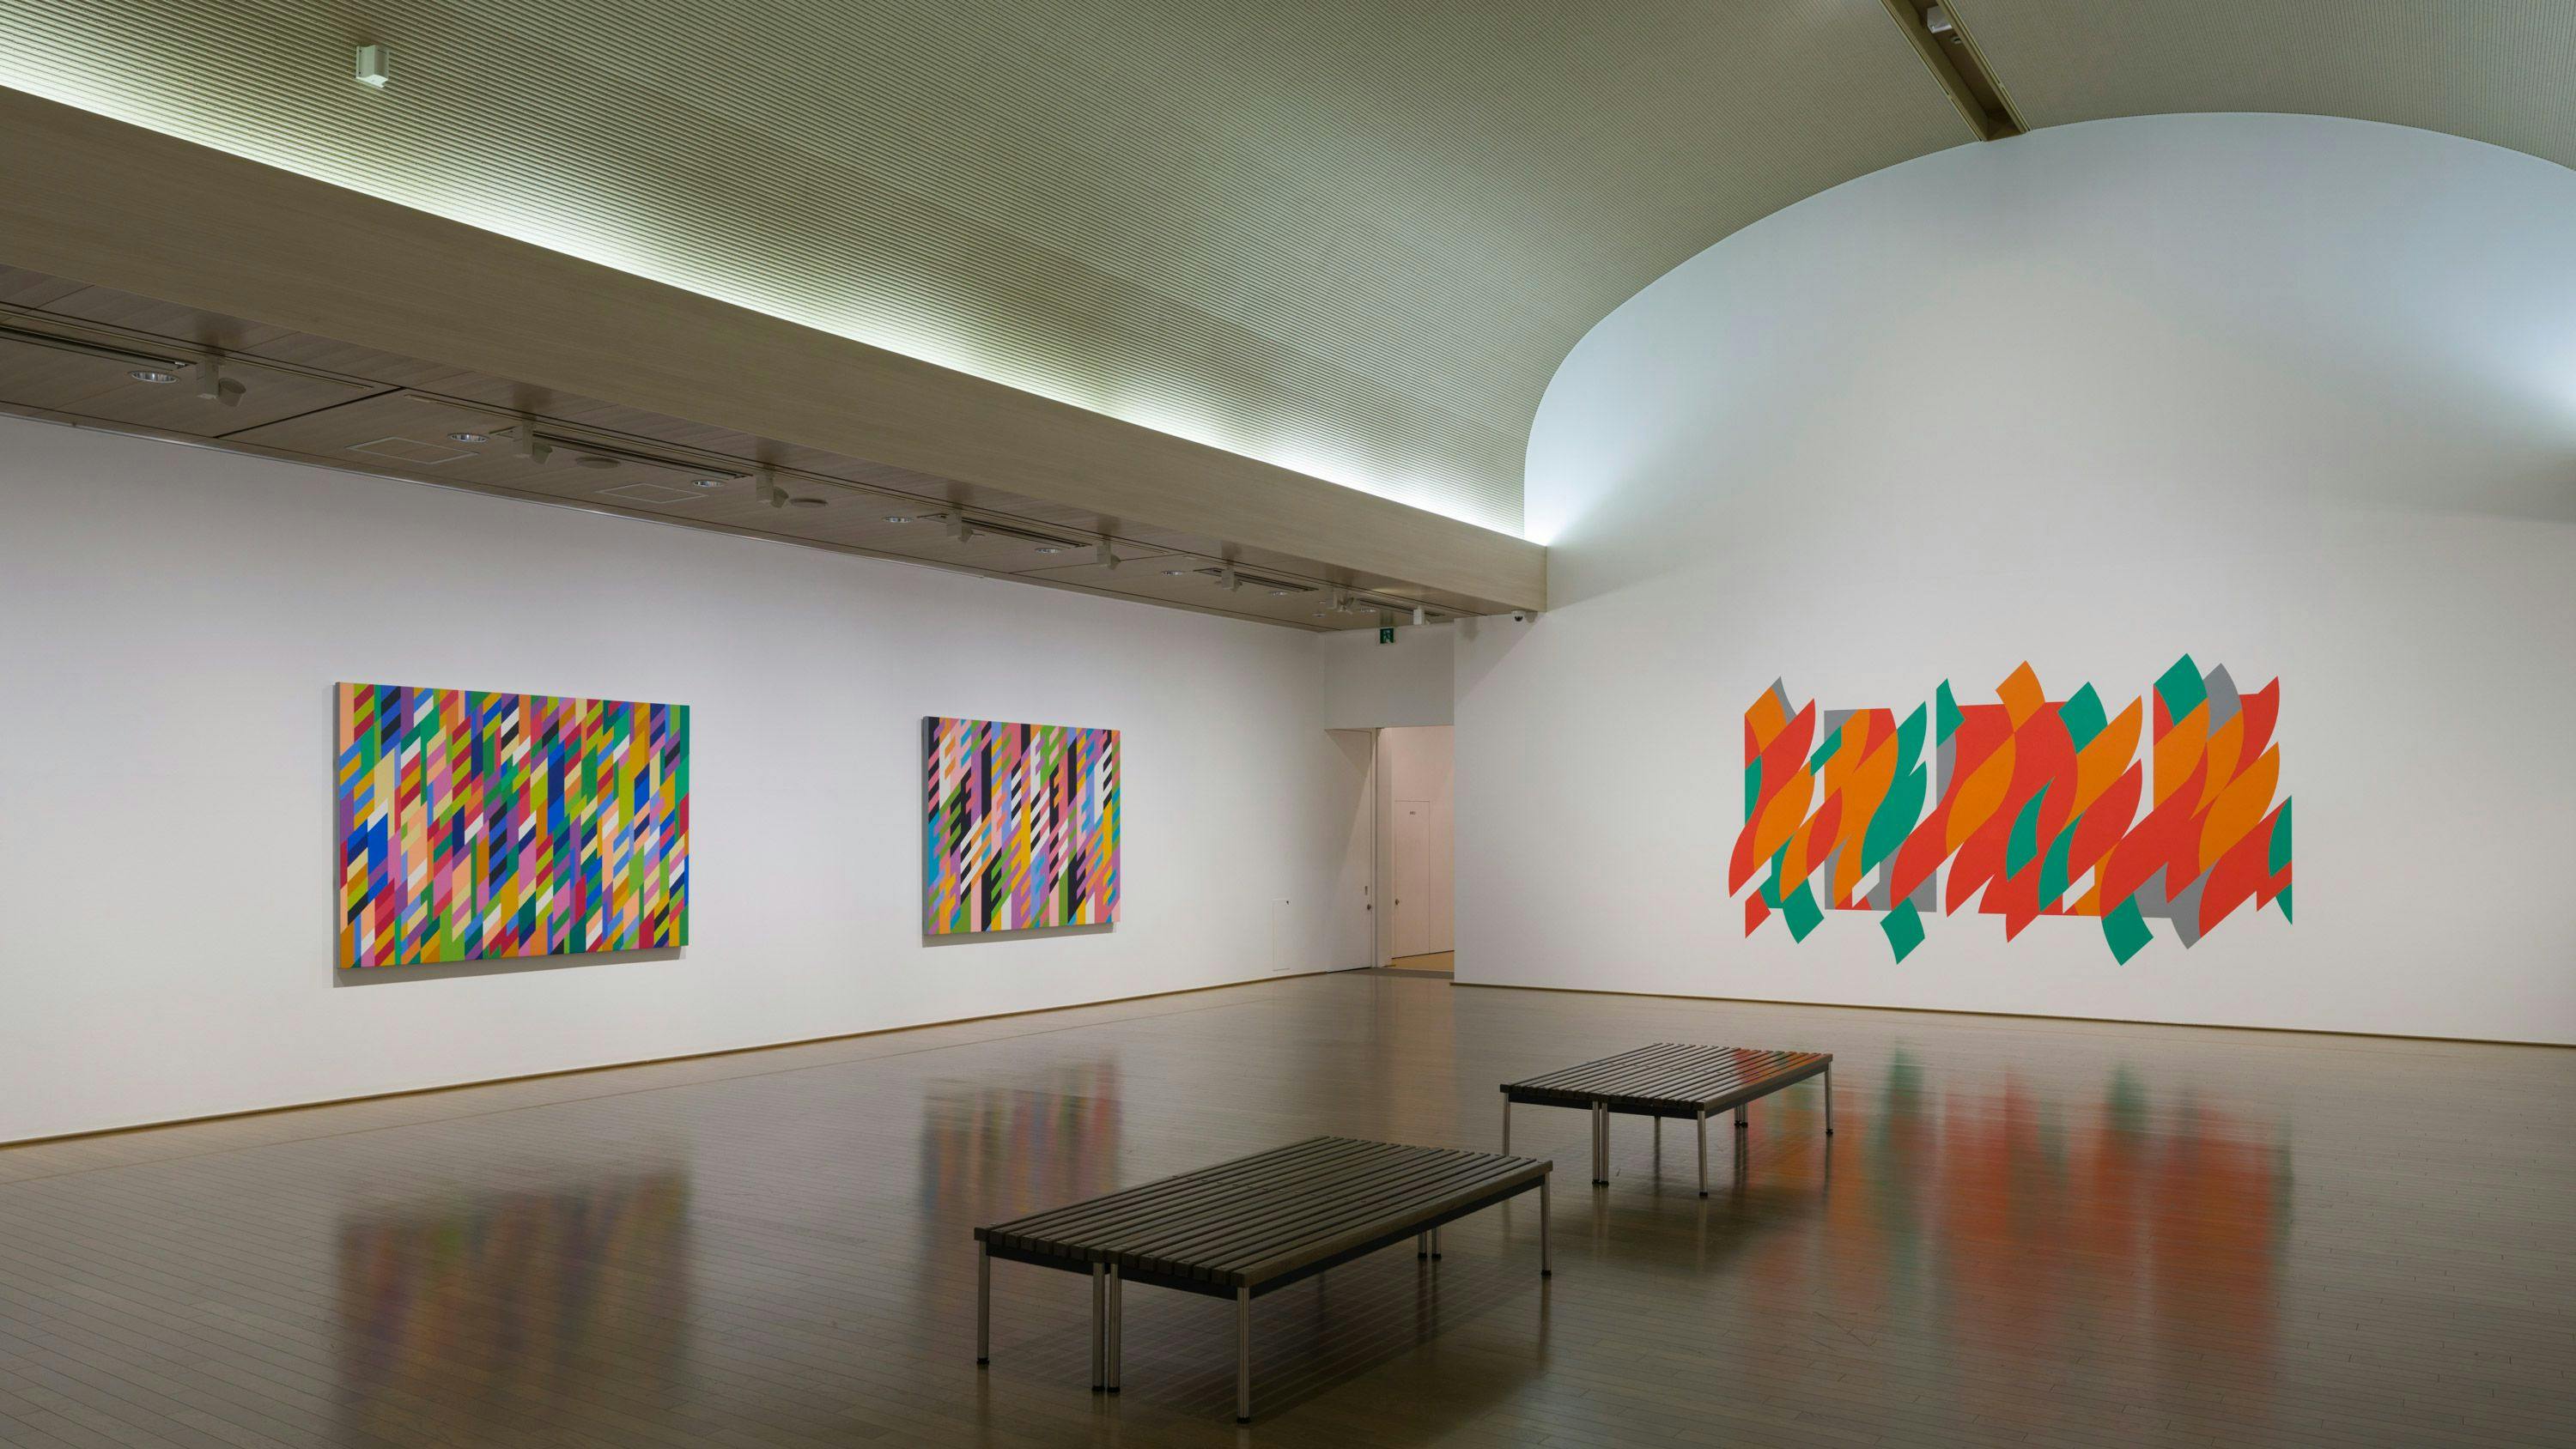 An installation view of the exhibition, Bridget Riley: Paintings from the 1960s to the Present, at Kawamura Memorial DIC Museum of Art, Sakura, Japan, dated 2018.